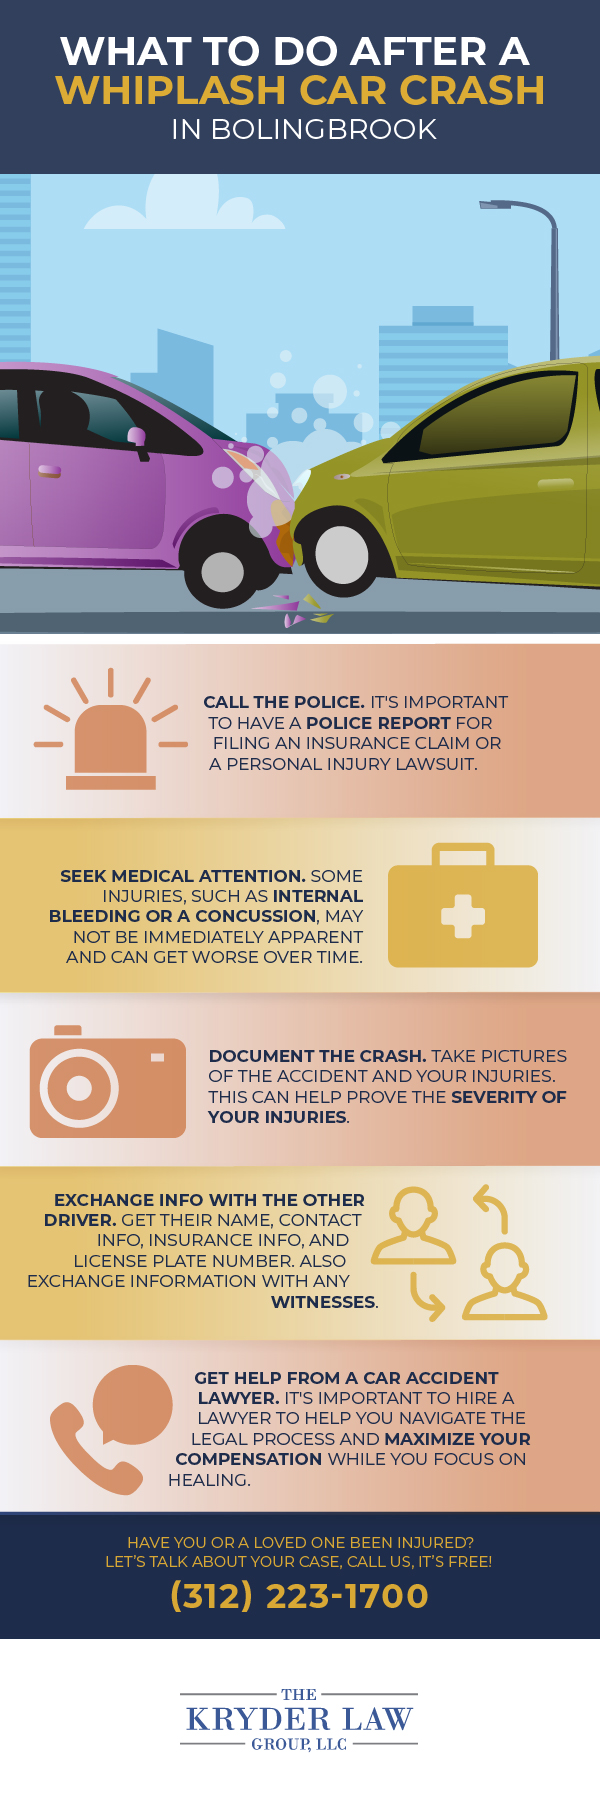 What to Do After a Whiplash Car Crash in Bolingbrook Infographic